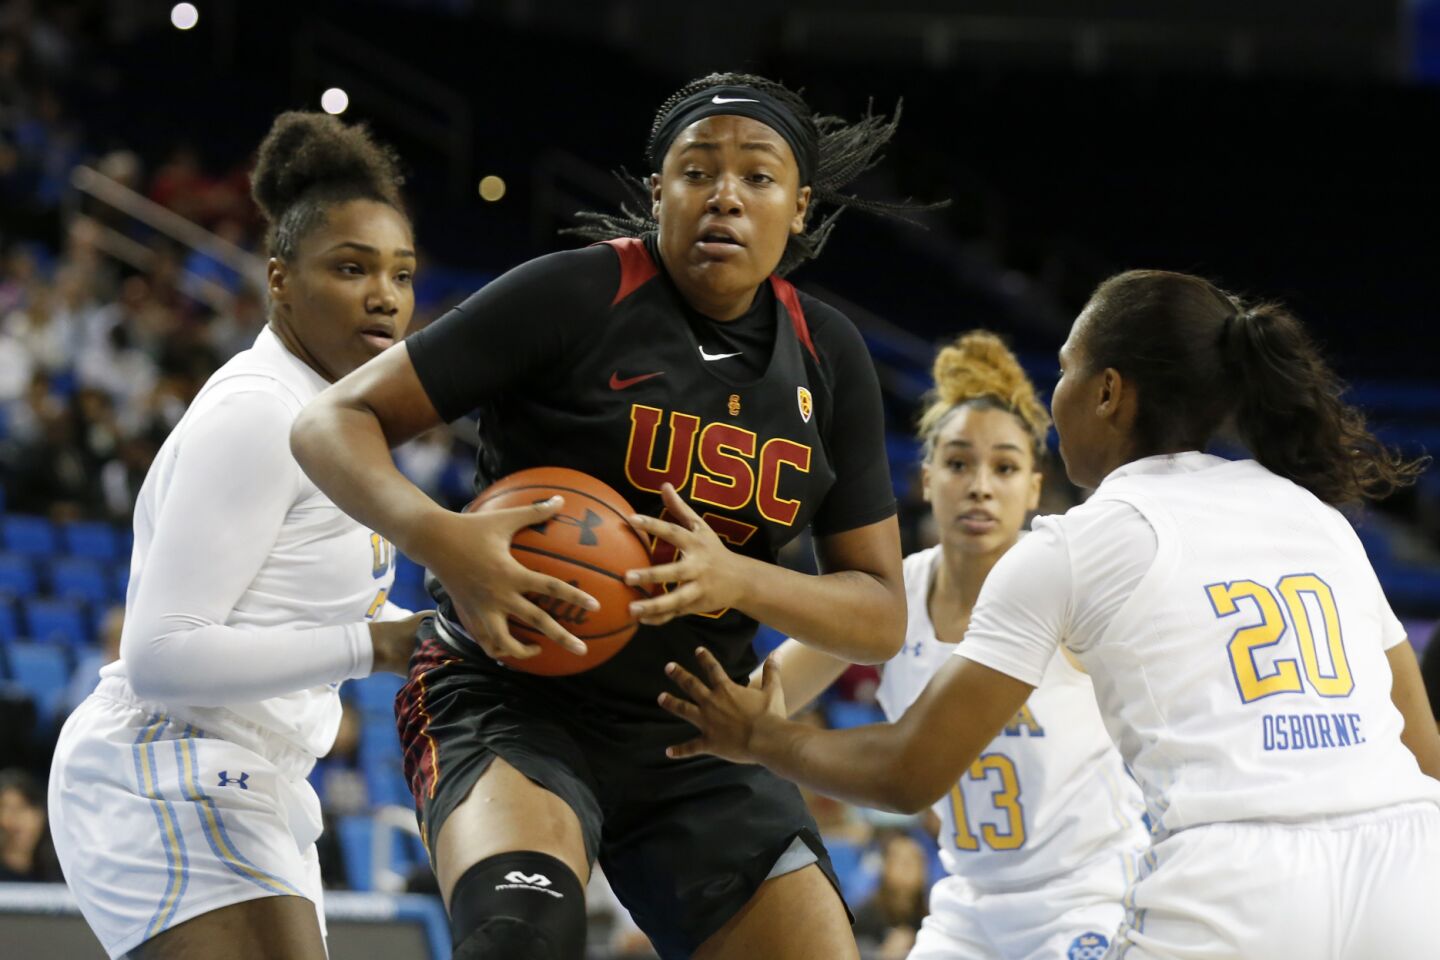 USC center Angel Jackson drives to the basket past UCLA guard Charisma Osborne (20) during the first half.